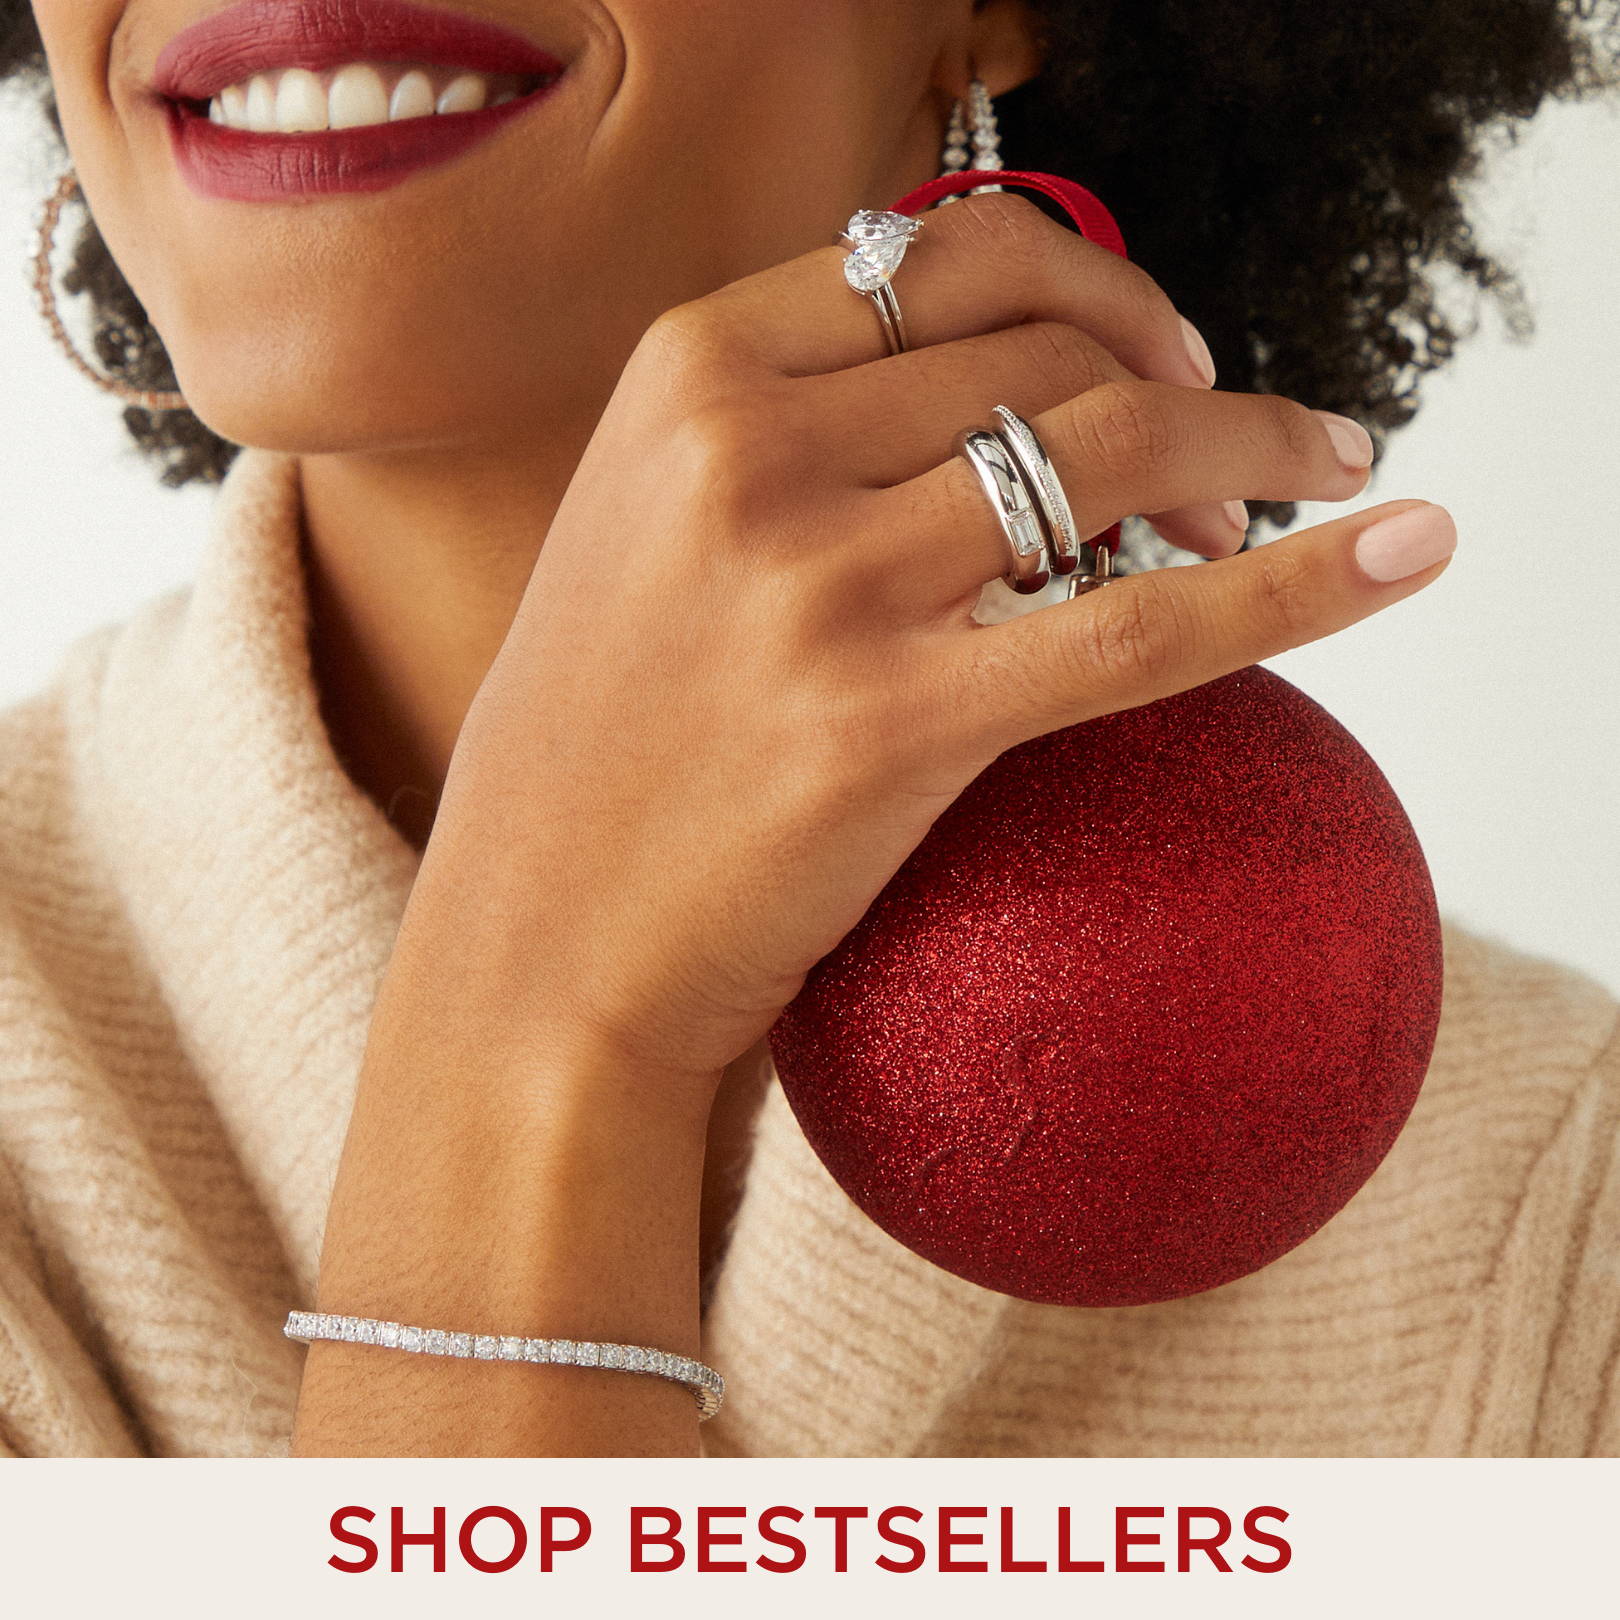 SHOP BESTSELLERS. Image of model wearing cubic zirconia rings and a cubic zirconia tennis bracelet while holding a red Christmas ornament. 